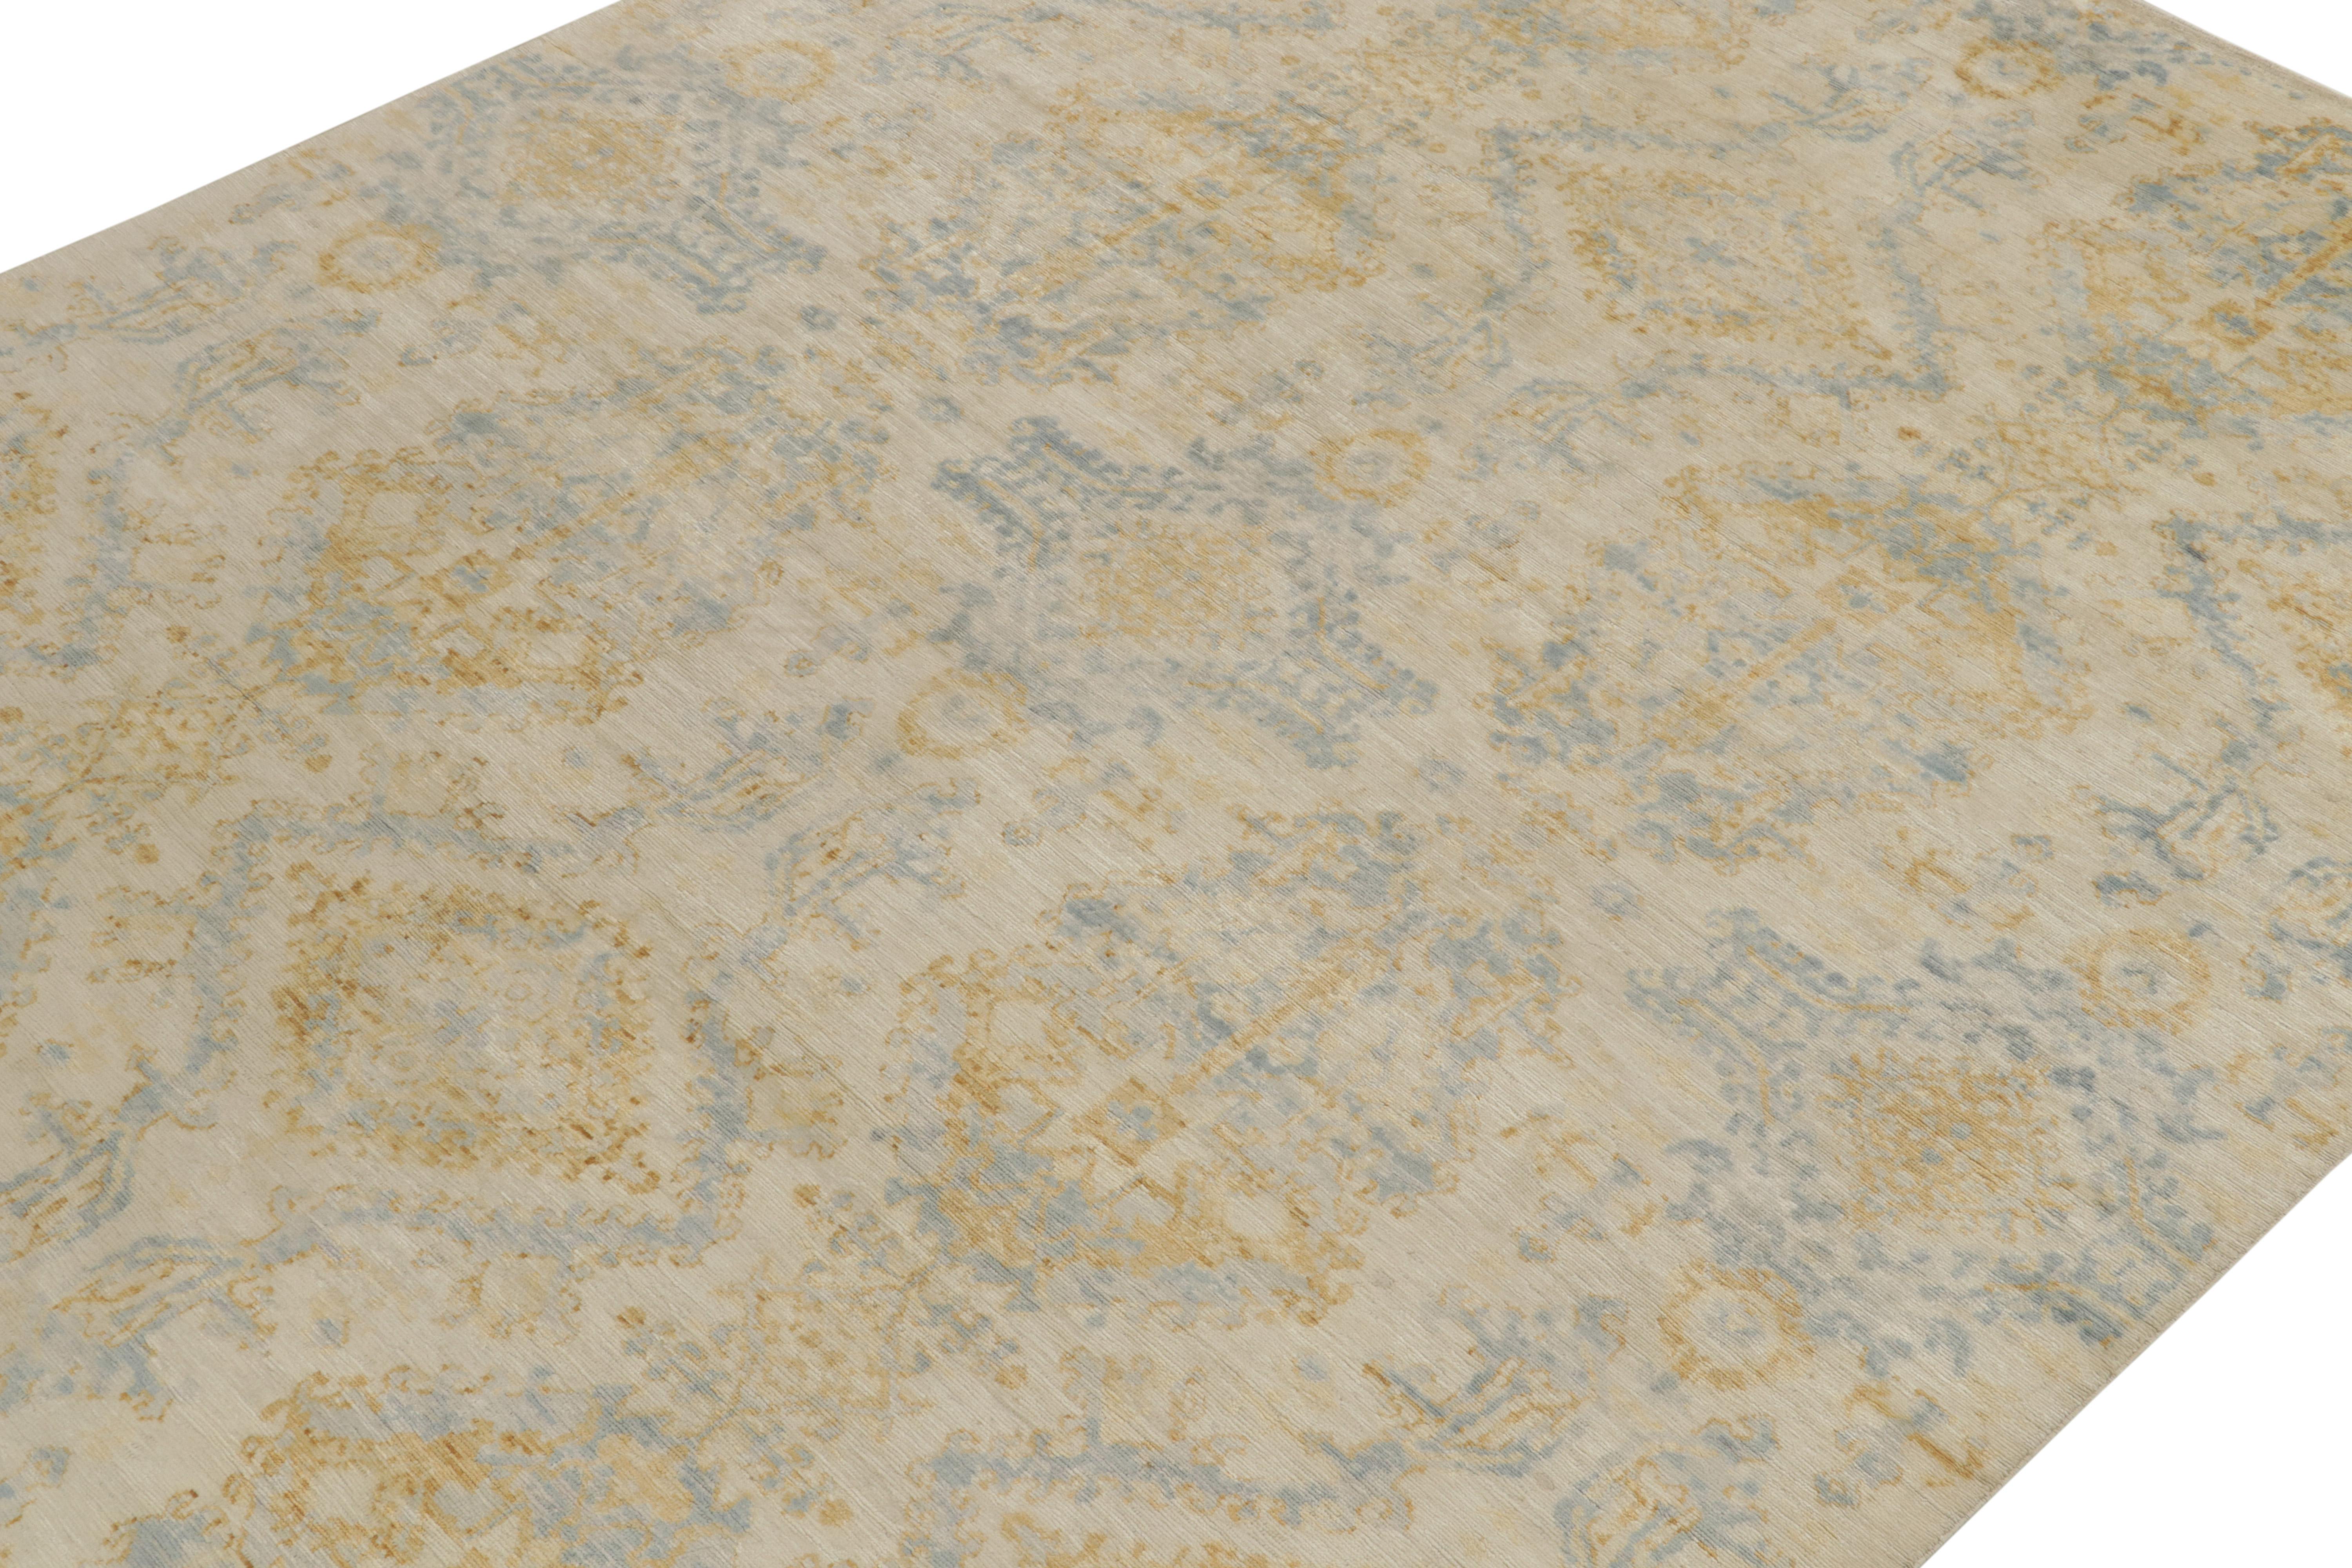 Indian Rug & Kilim’s Contemporary Rug in Blue, Gold & Beige All over Pattern For Sale